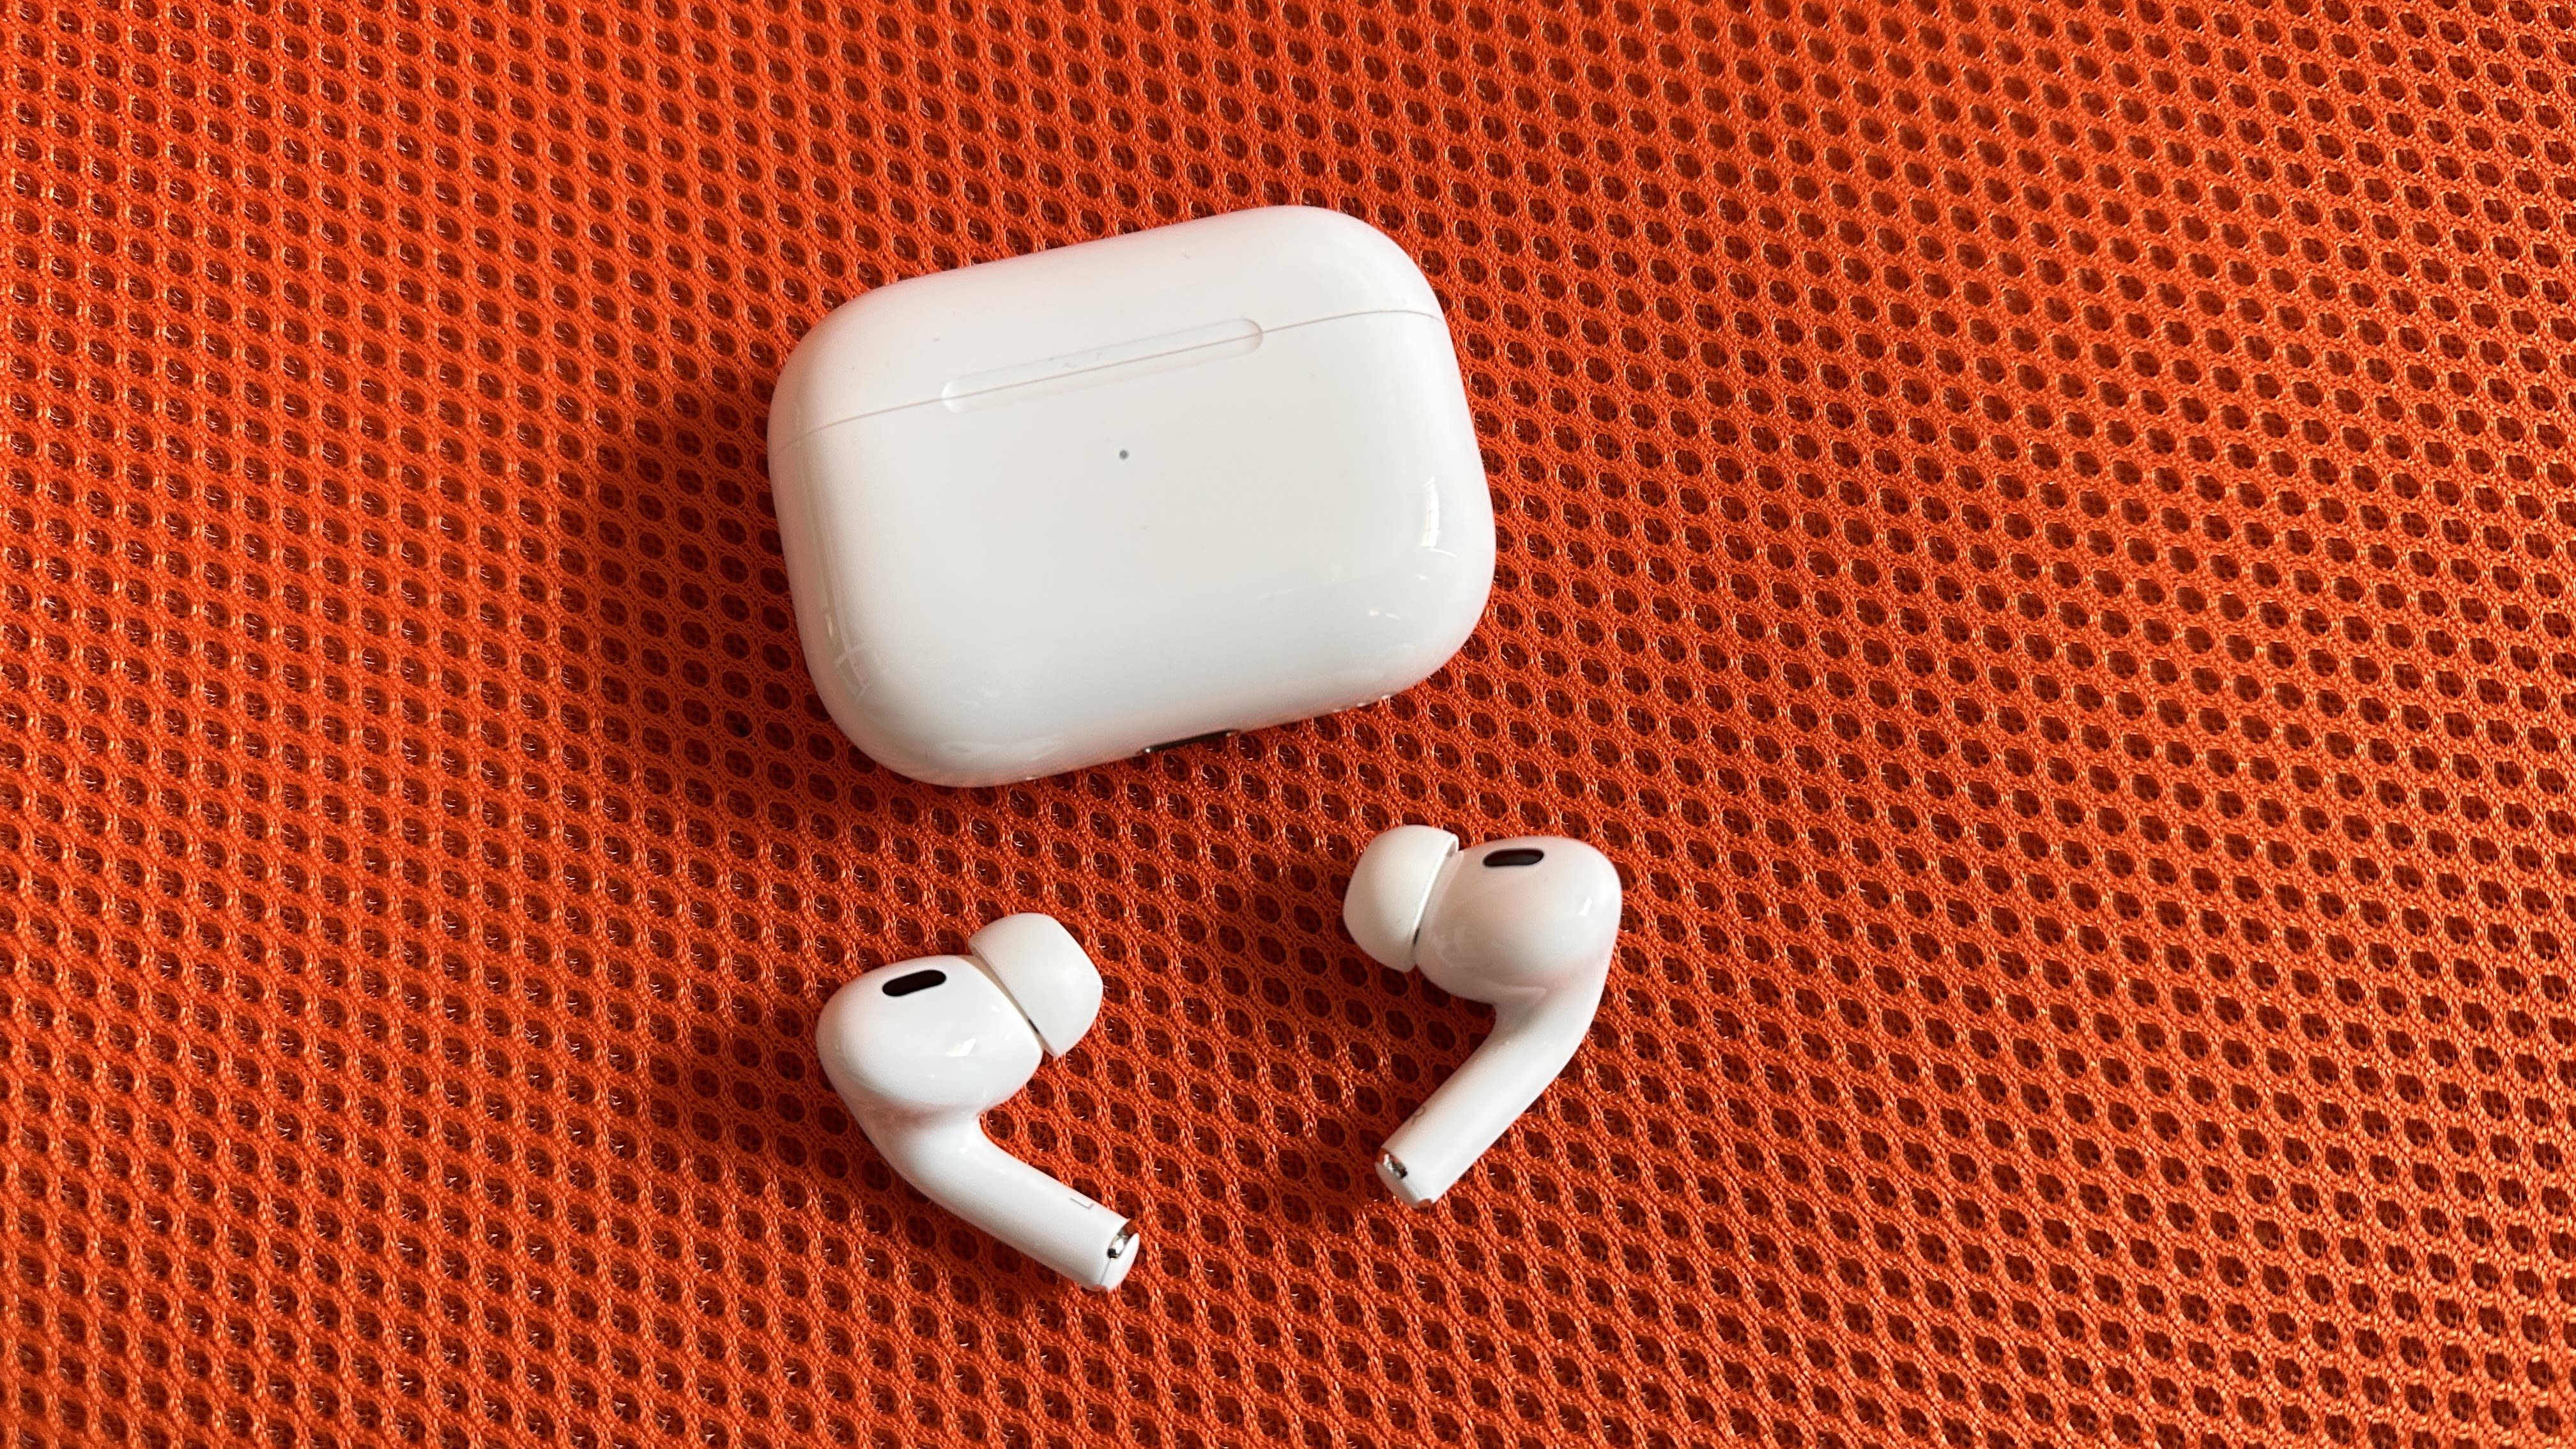 Apple AirPods Pro Review: The Best Earbuds for iPhone